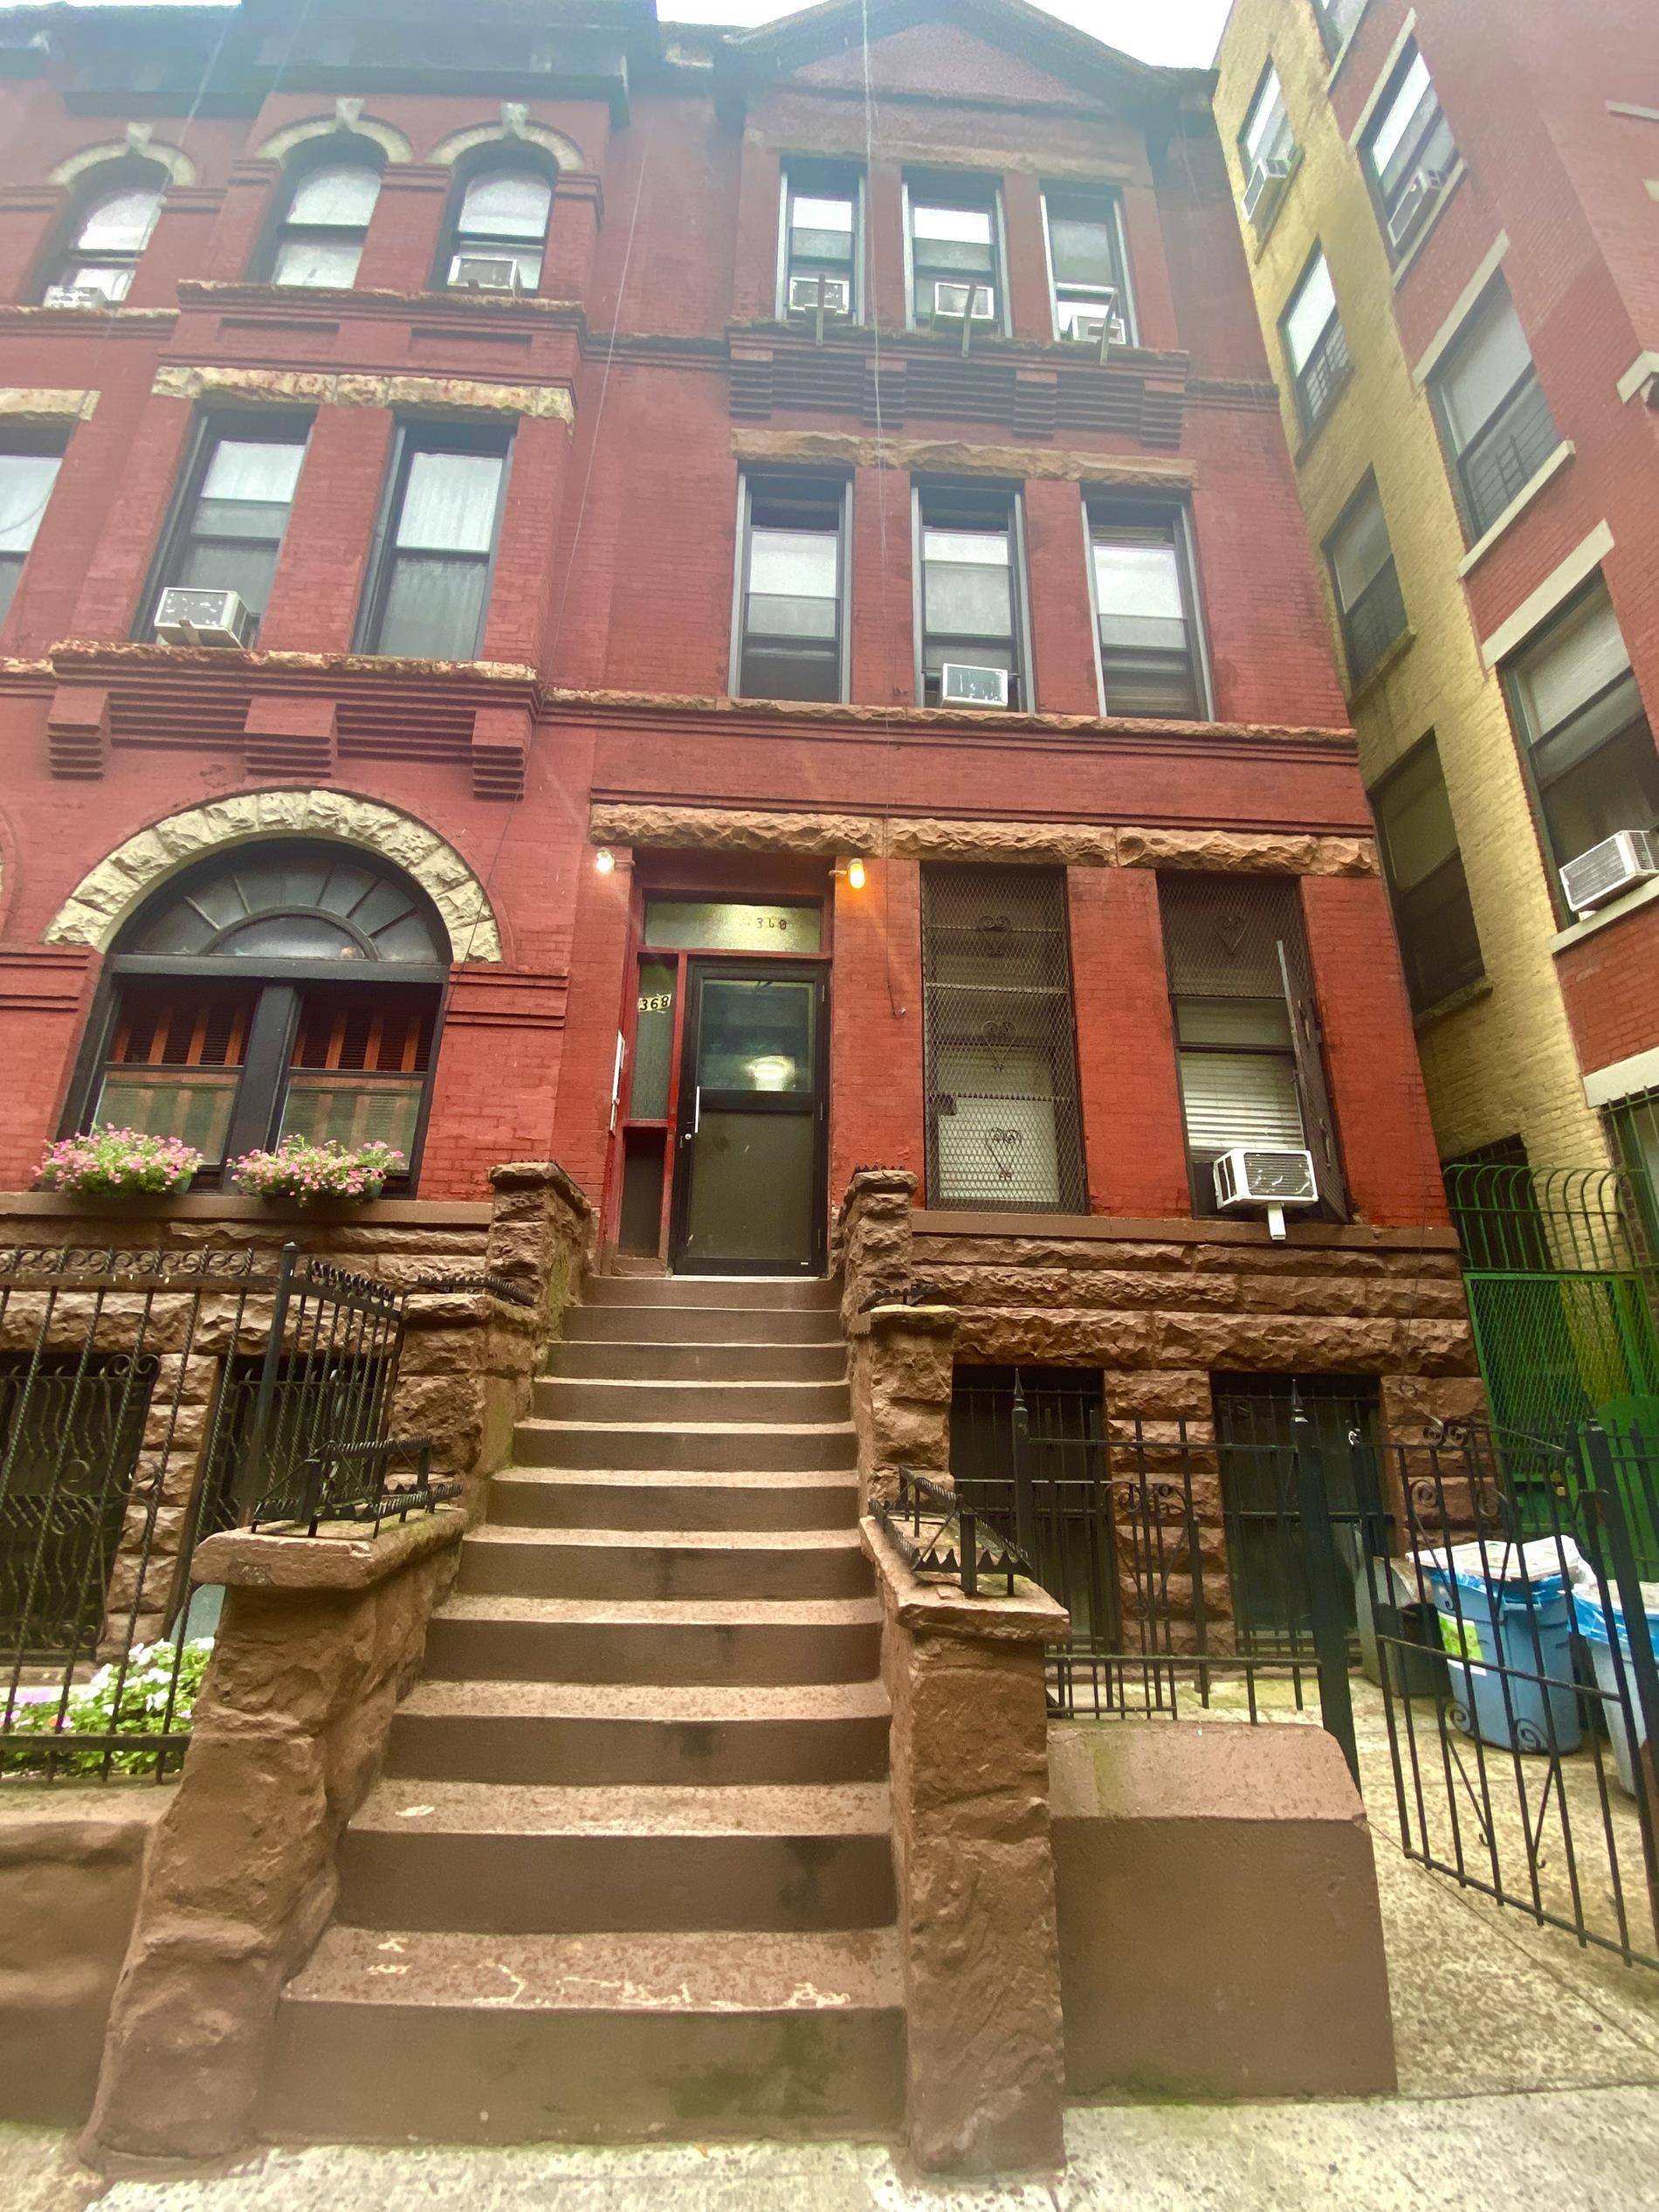 Video attached shows one of the studio units The Perfect Harlem Gem for an investor !